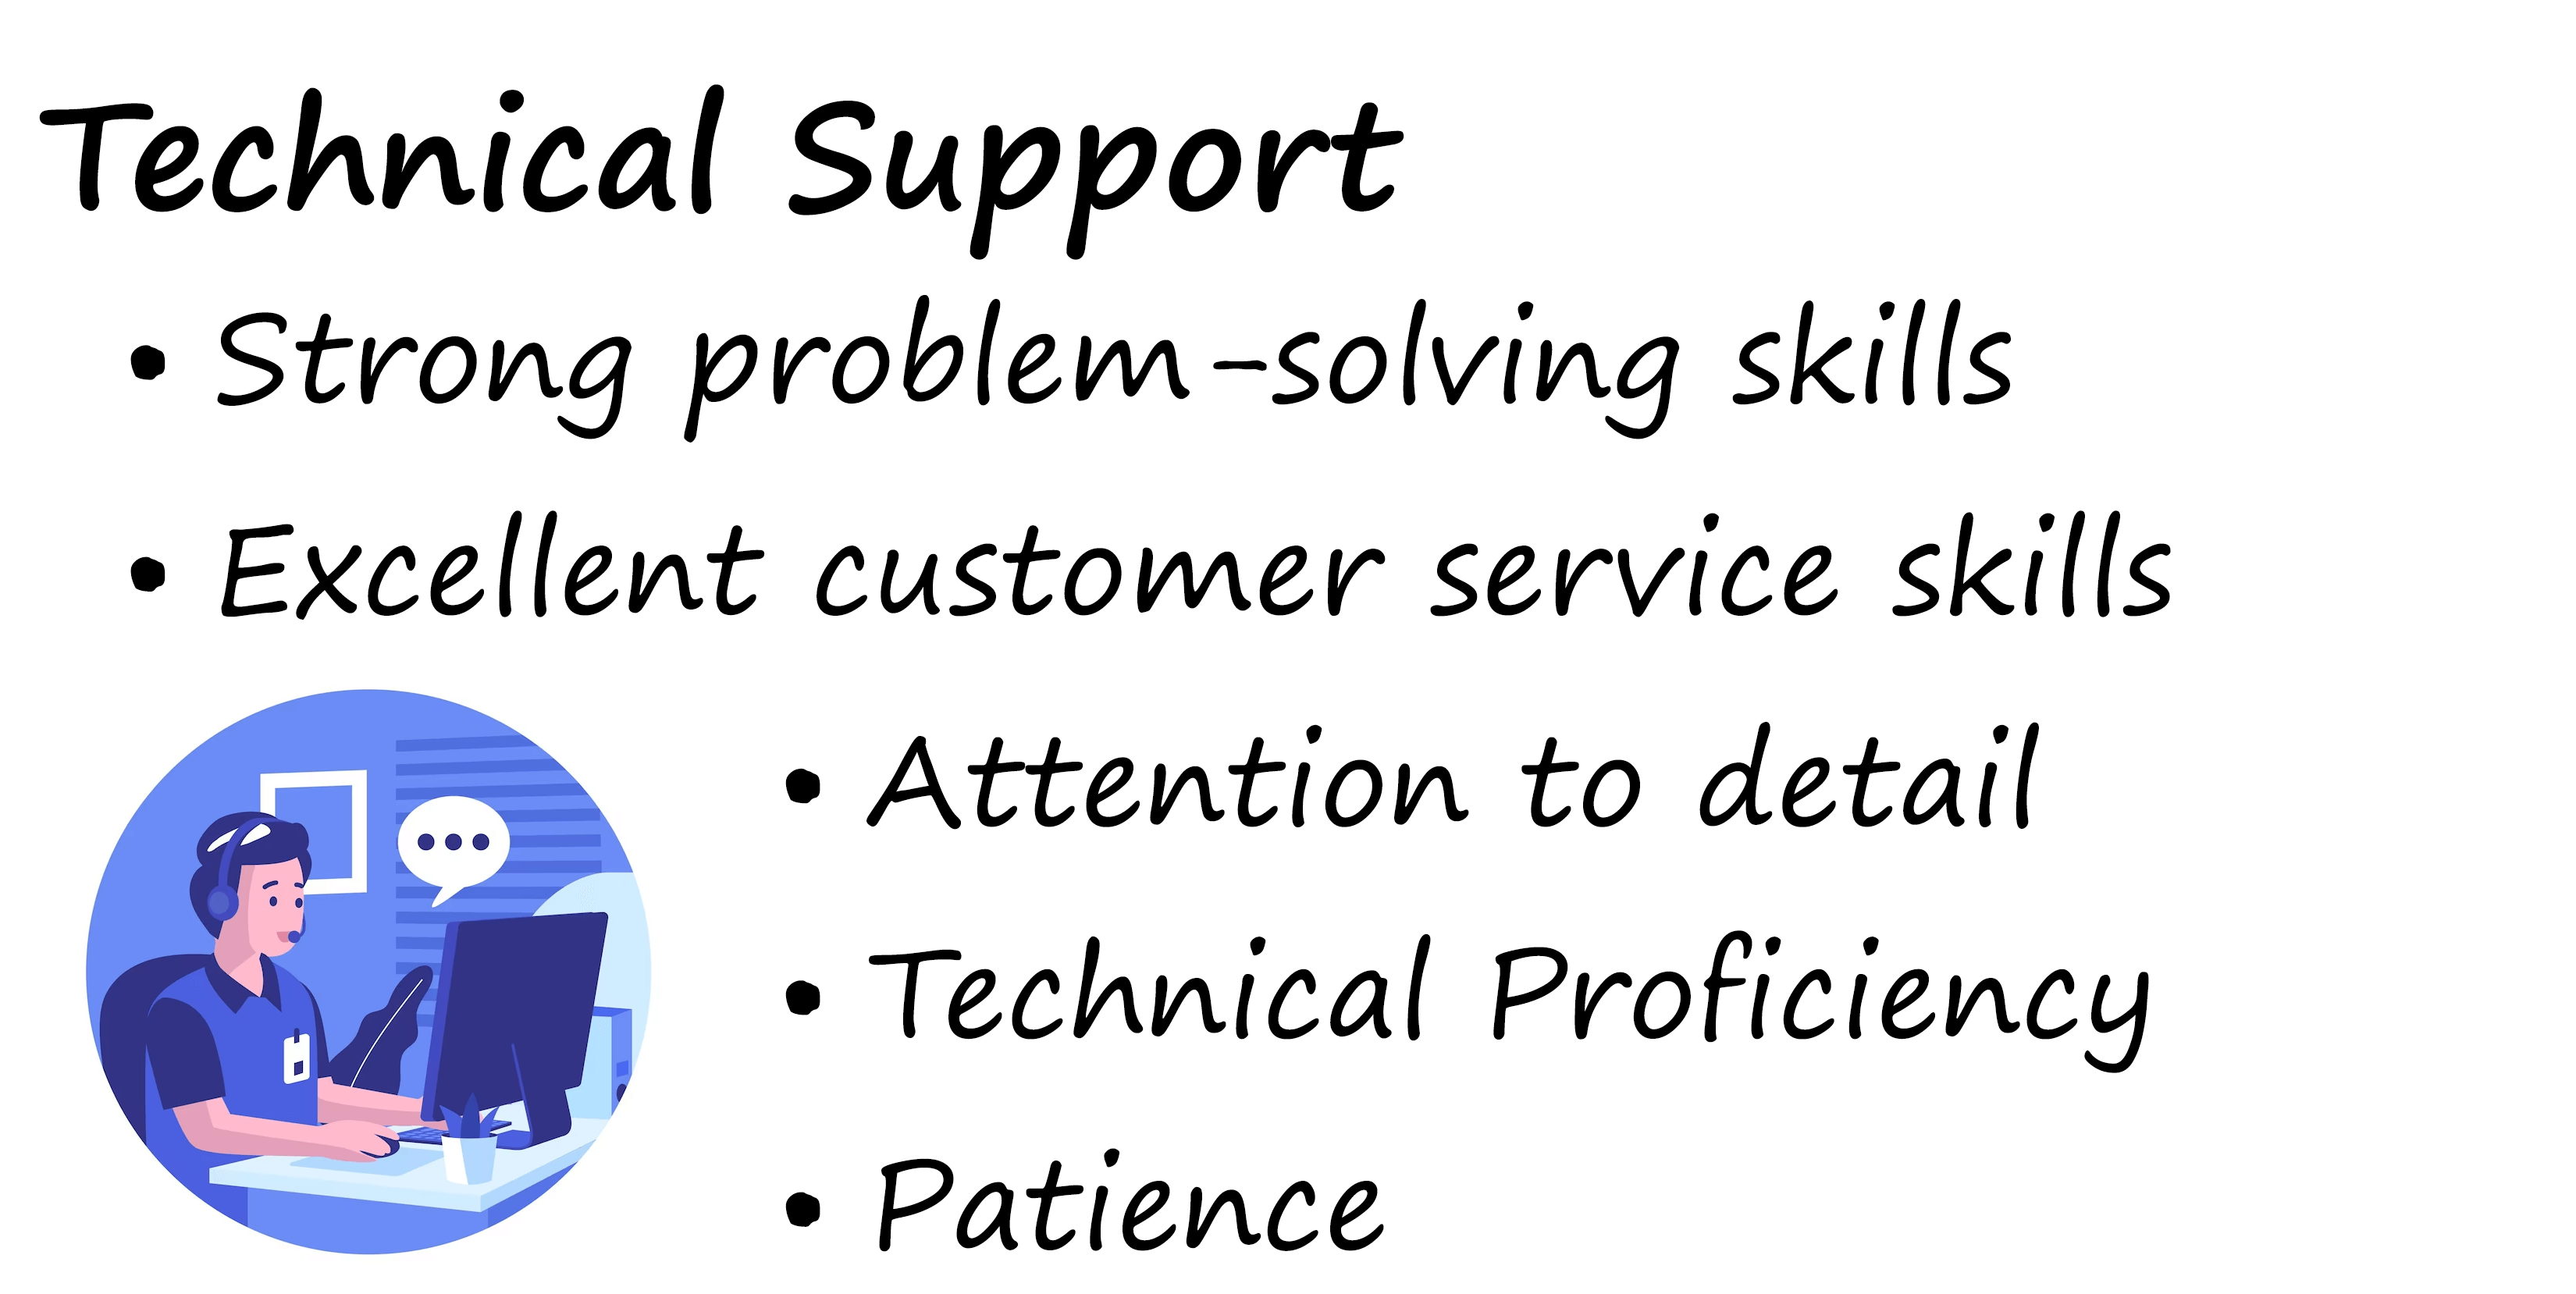 Technical Support - 1